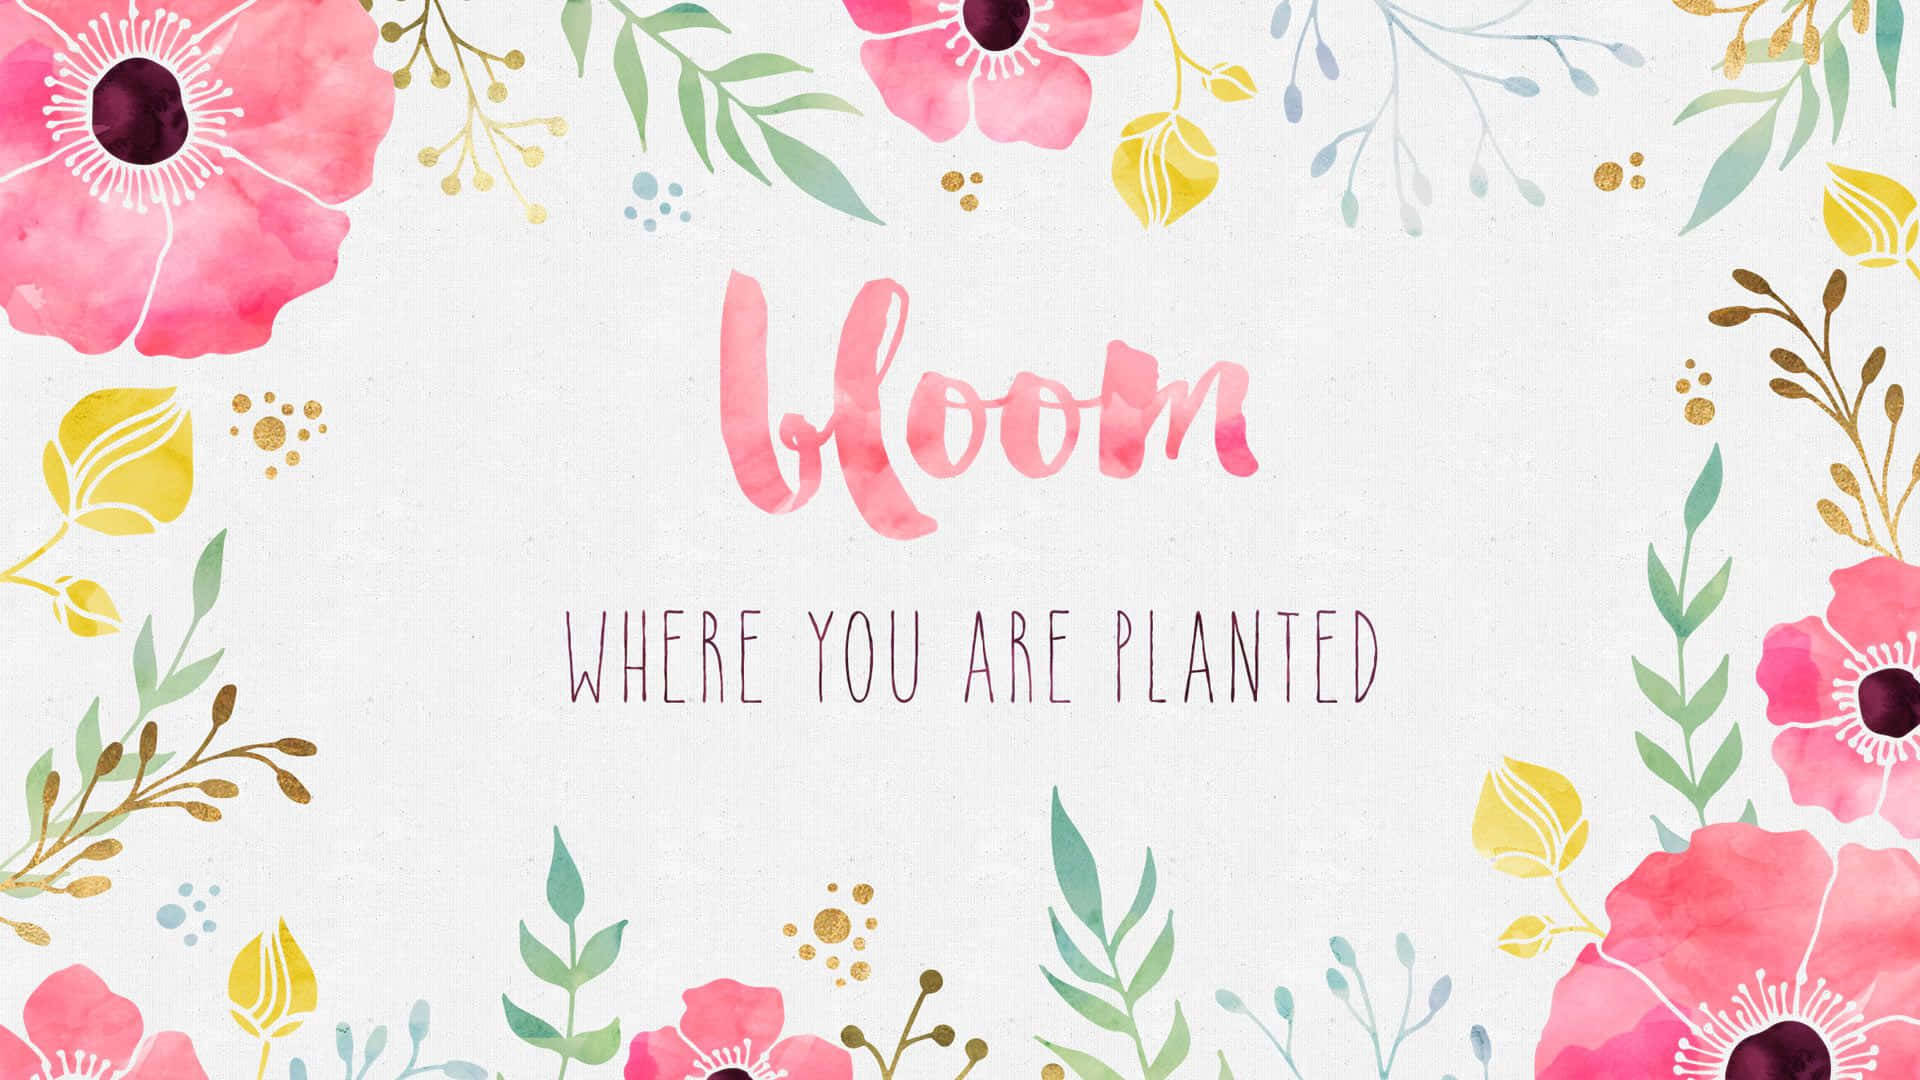 A Watercolor Floral Background With The Words Bloom Where You Are Planted Wallpaper